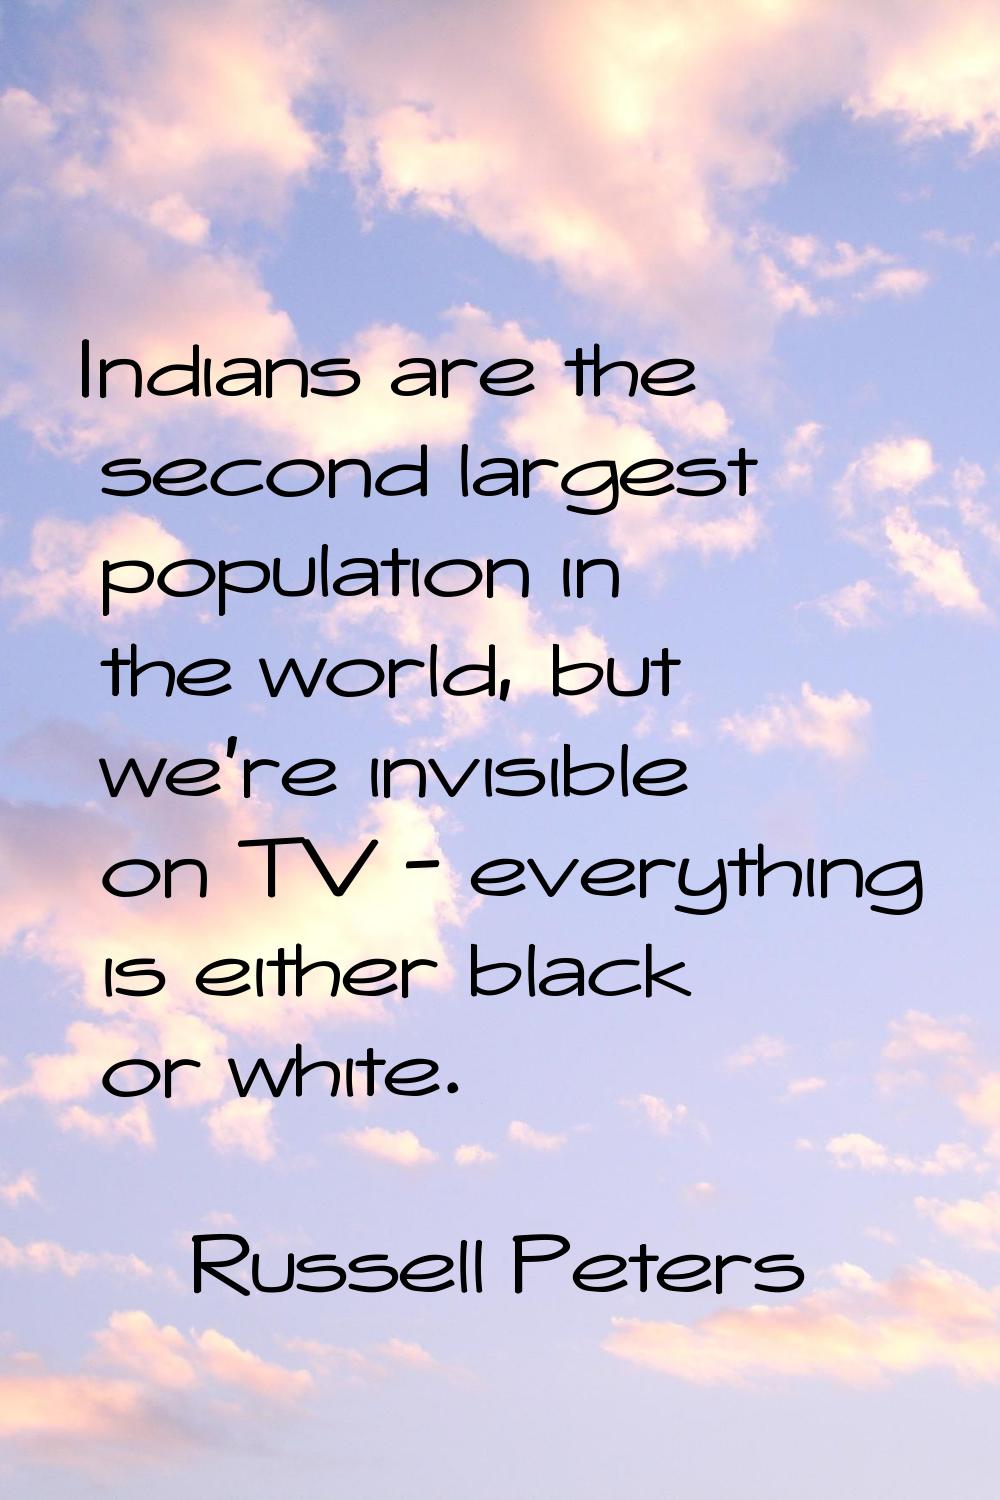 Indians are the second largest population in the world, but we're invisible on TV - everything is e